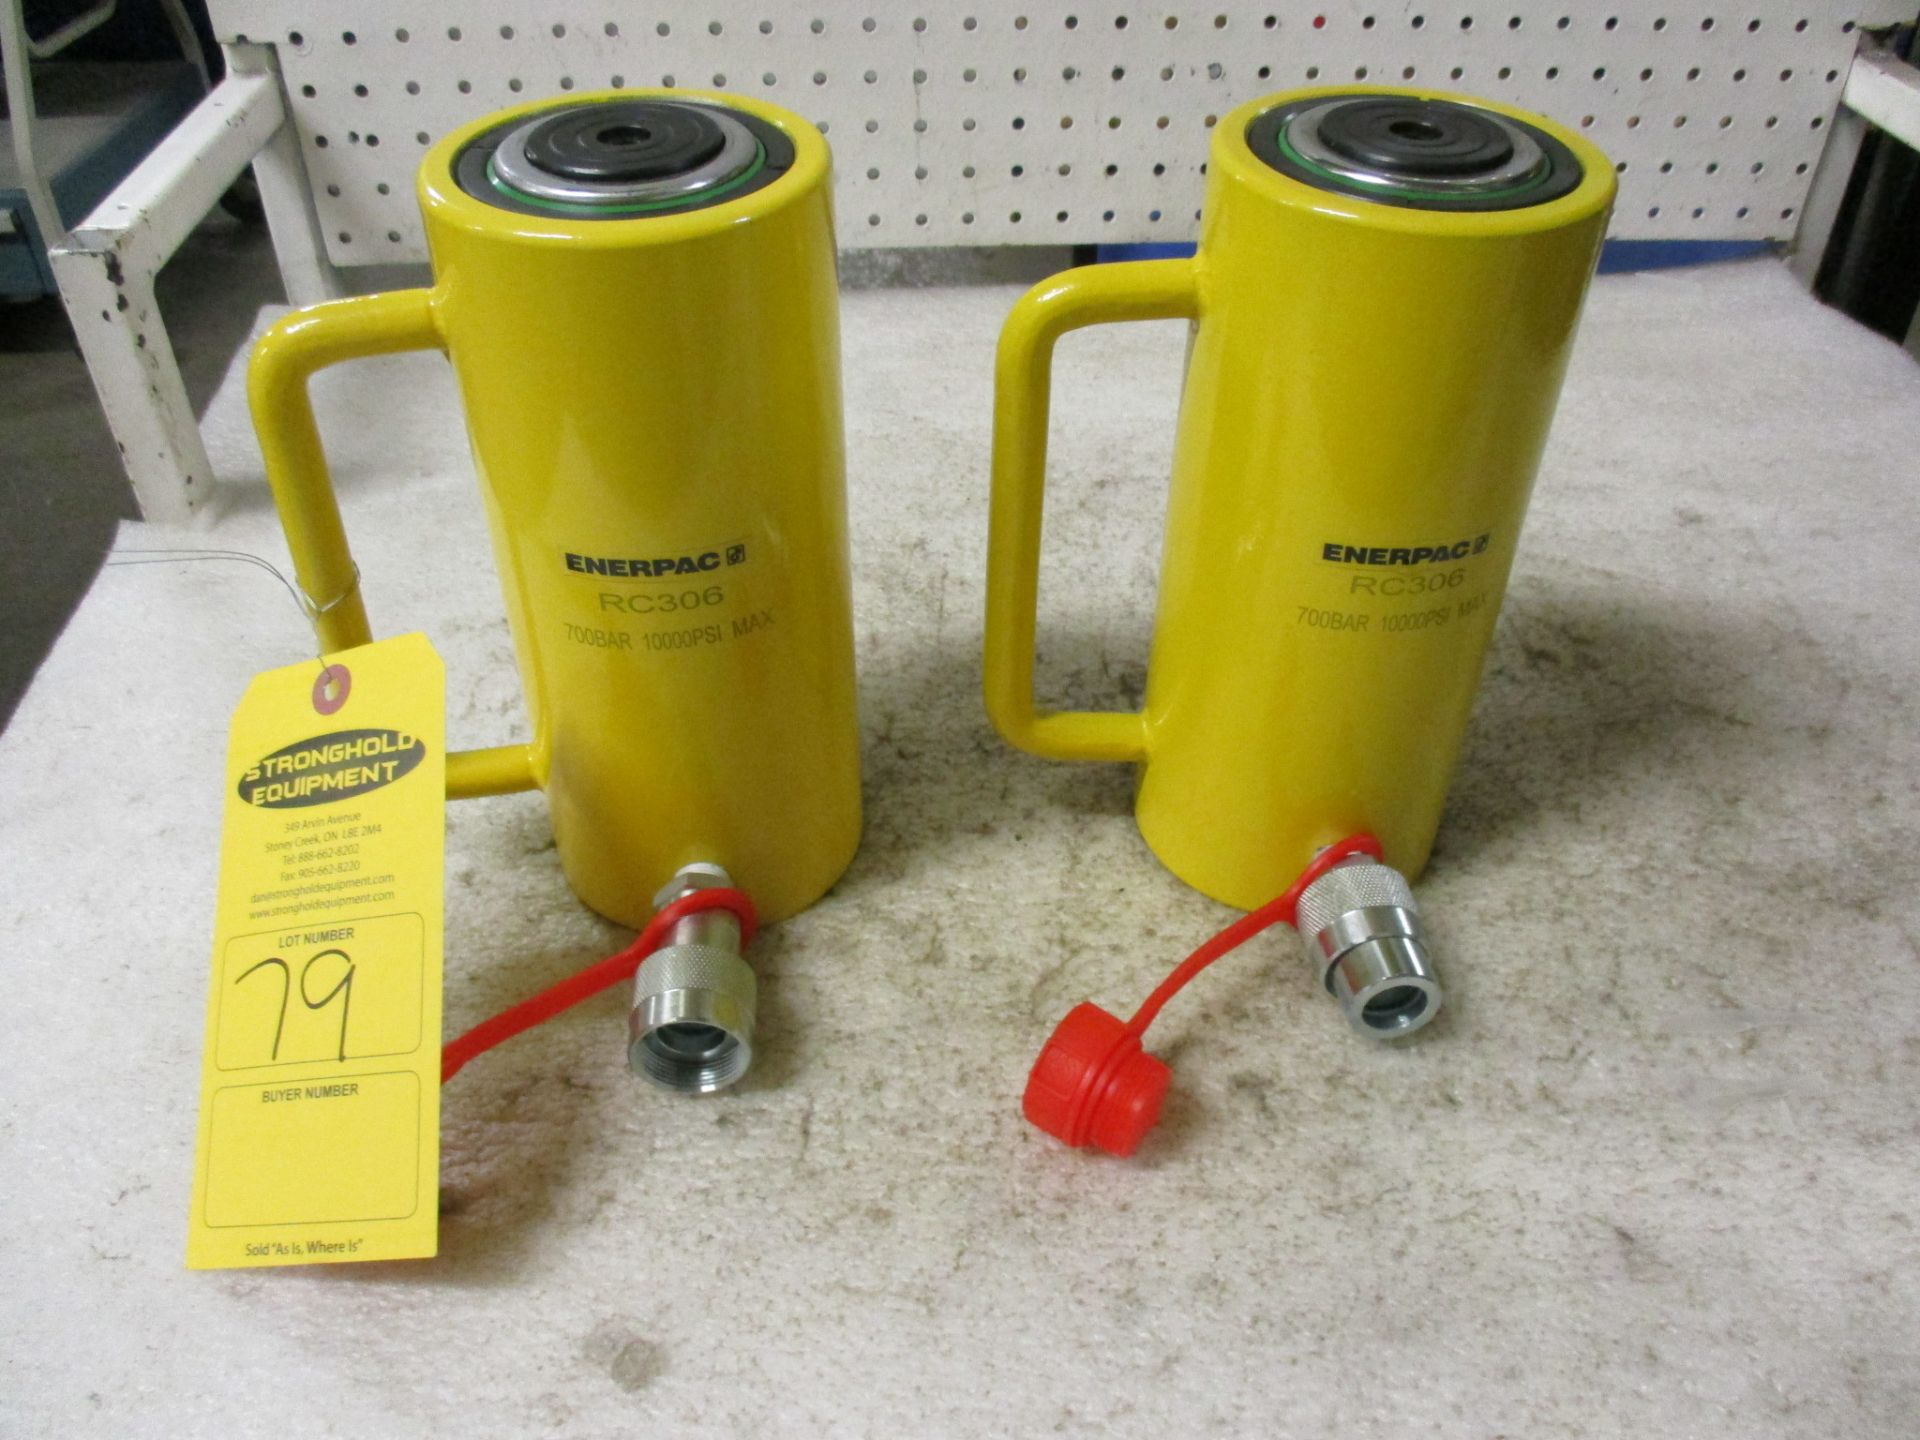 Lot of 2 (2 units) Enerpac RC-306 MINT - 30 ton Hydraulic Jack with 6" stroke type cylinder